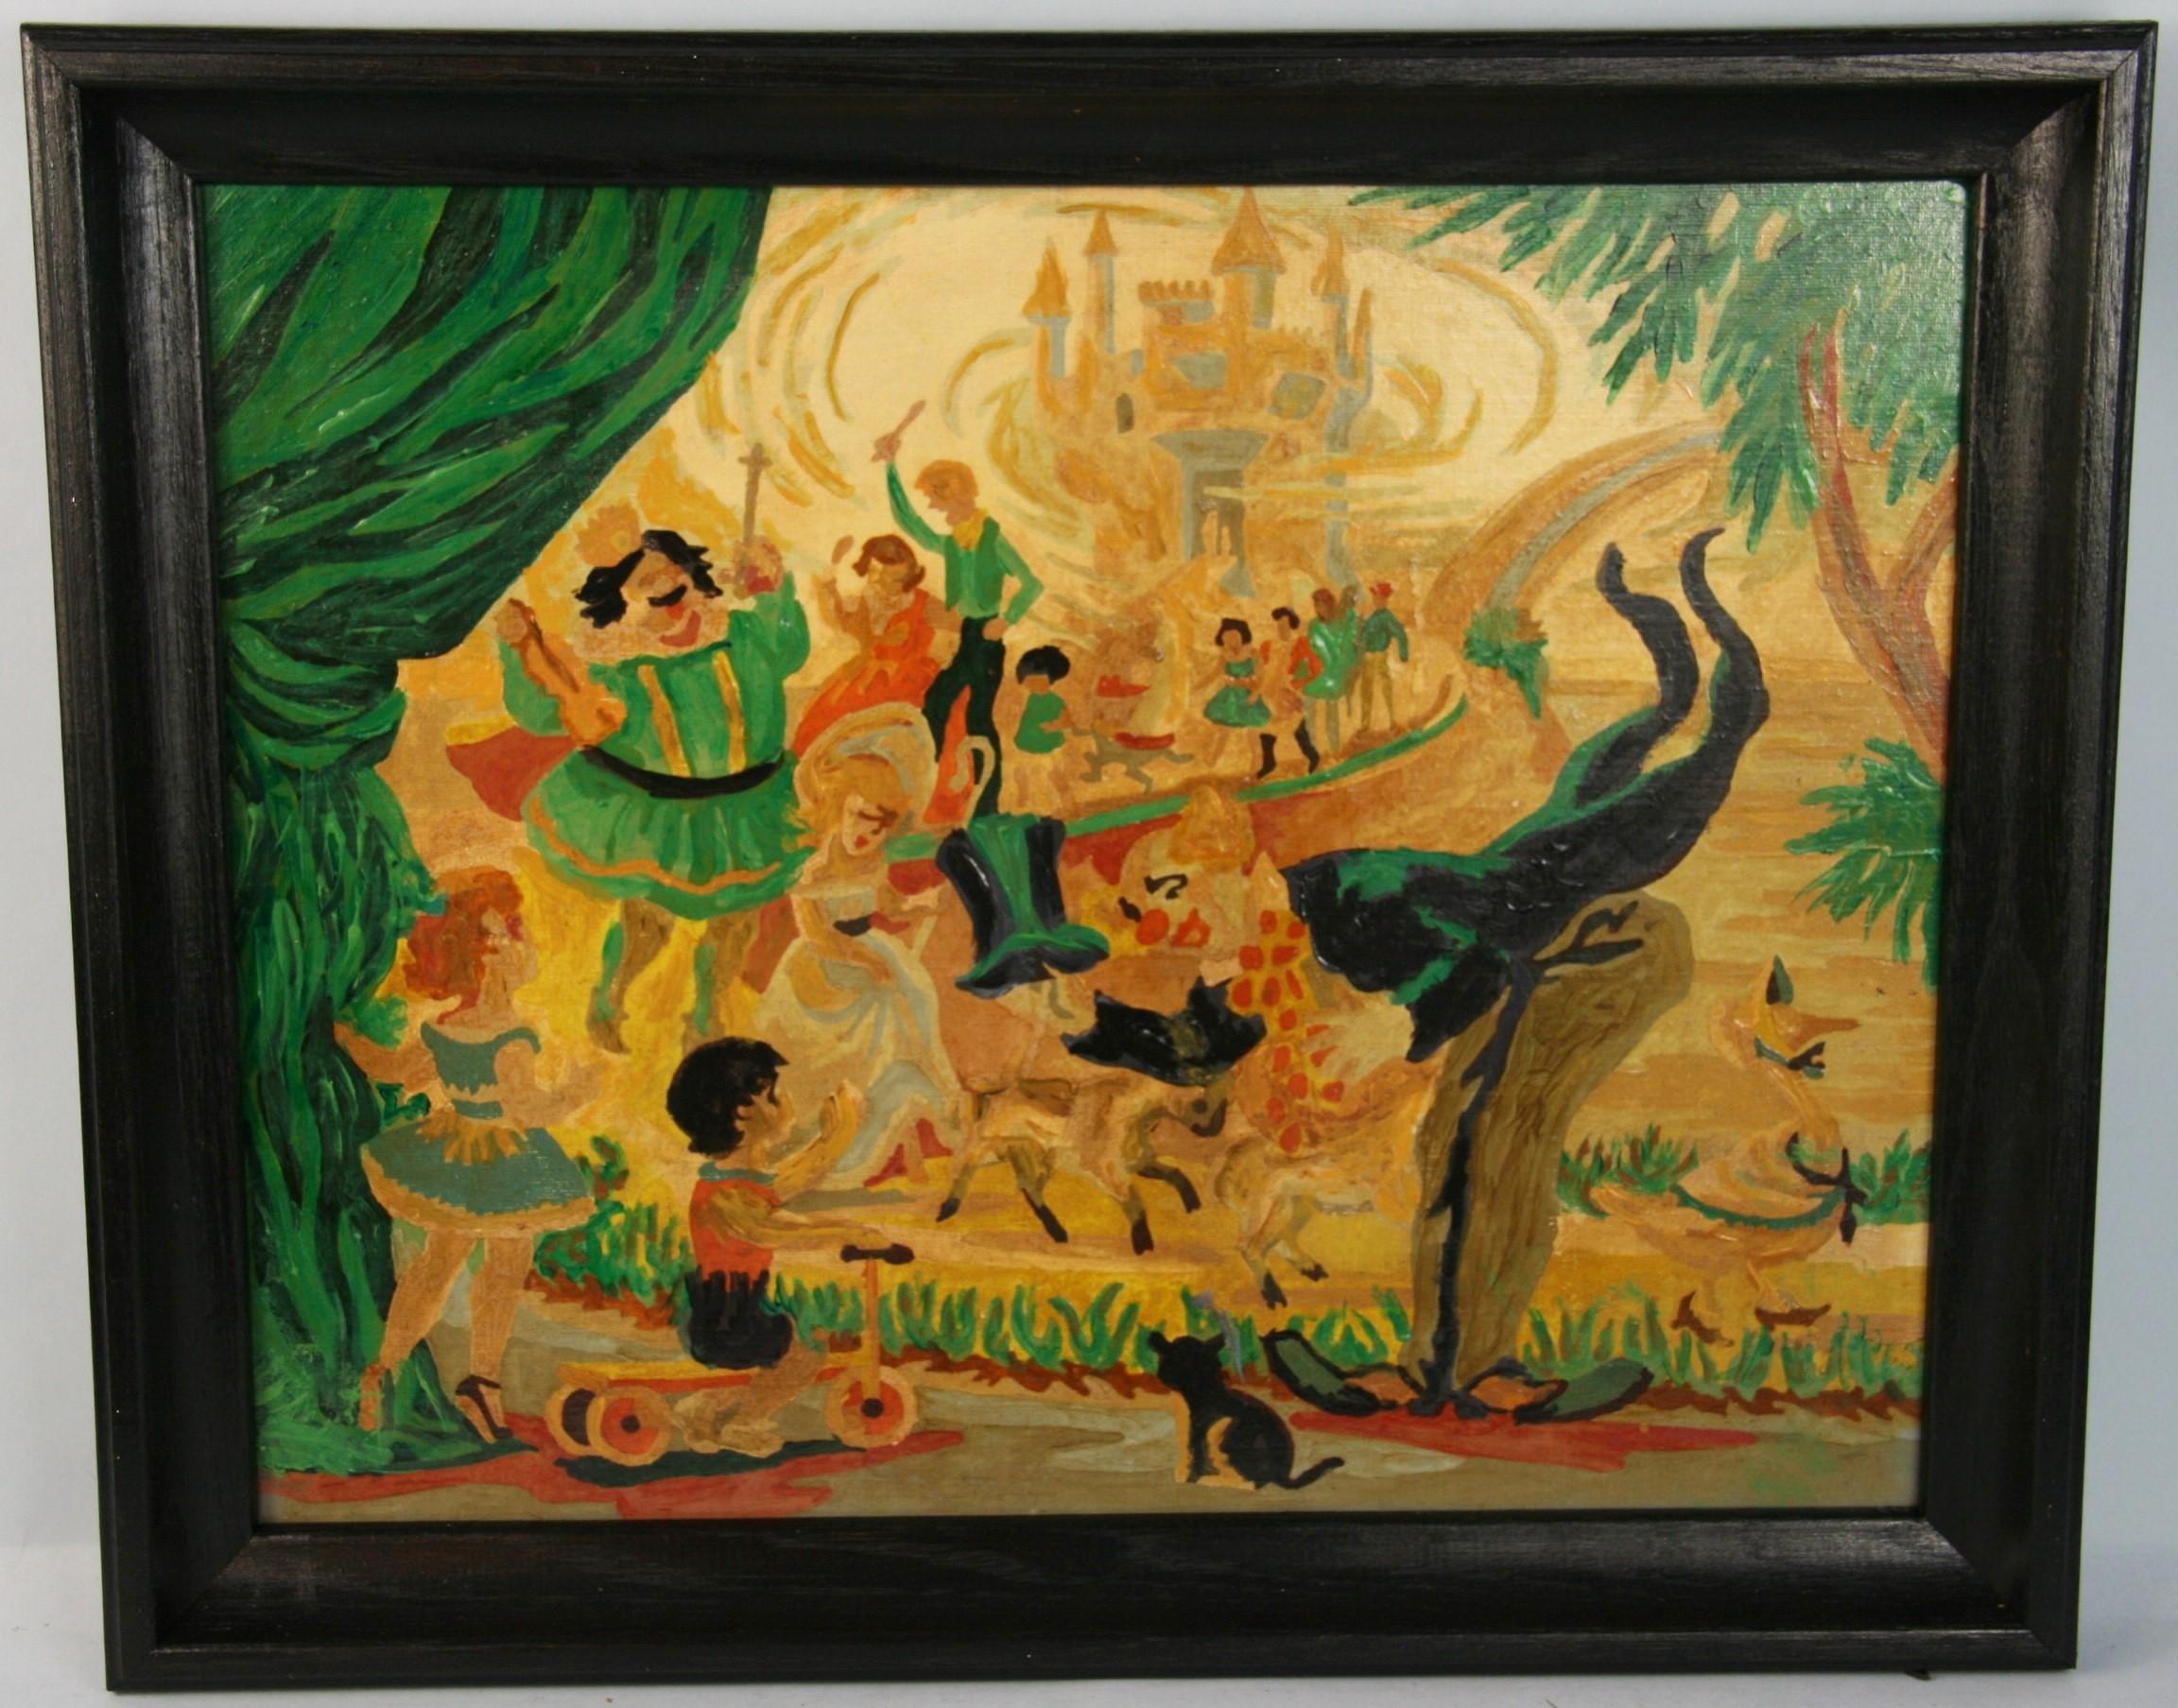 3981 Children's fantasy figurative oil painting set in a hand painted oak frame
Image size 15.5x19.25